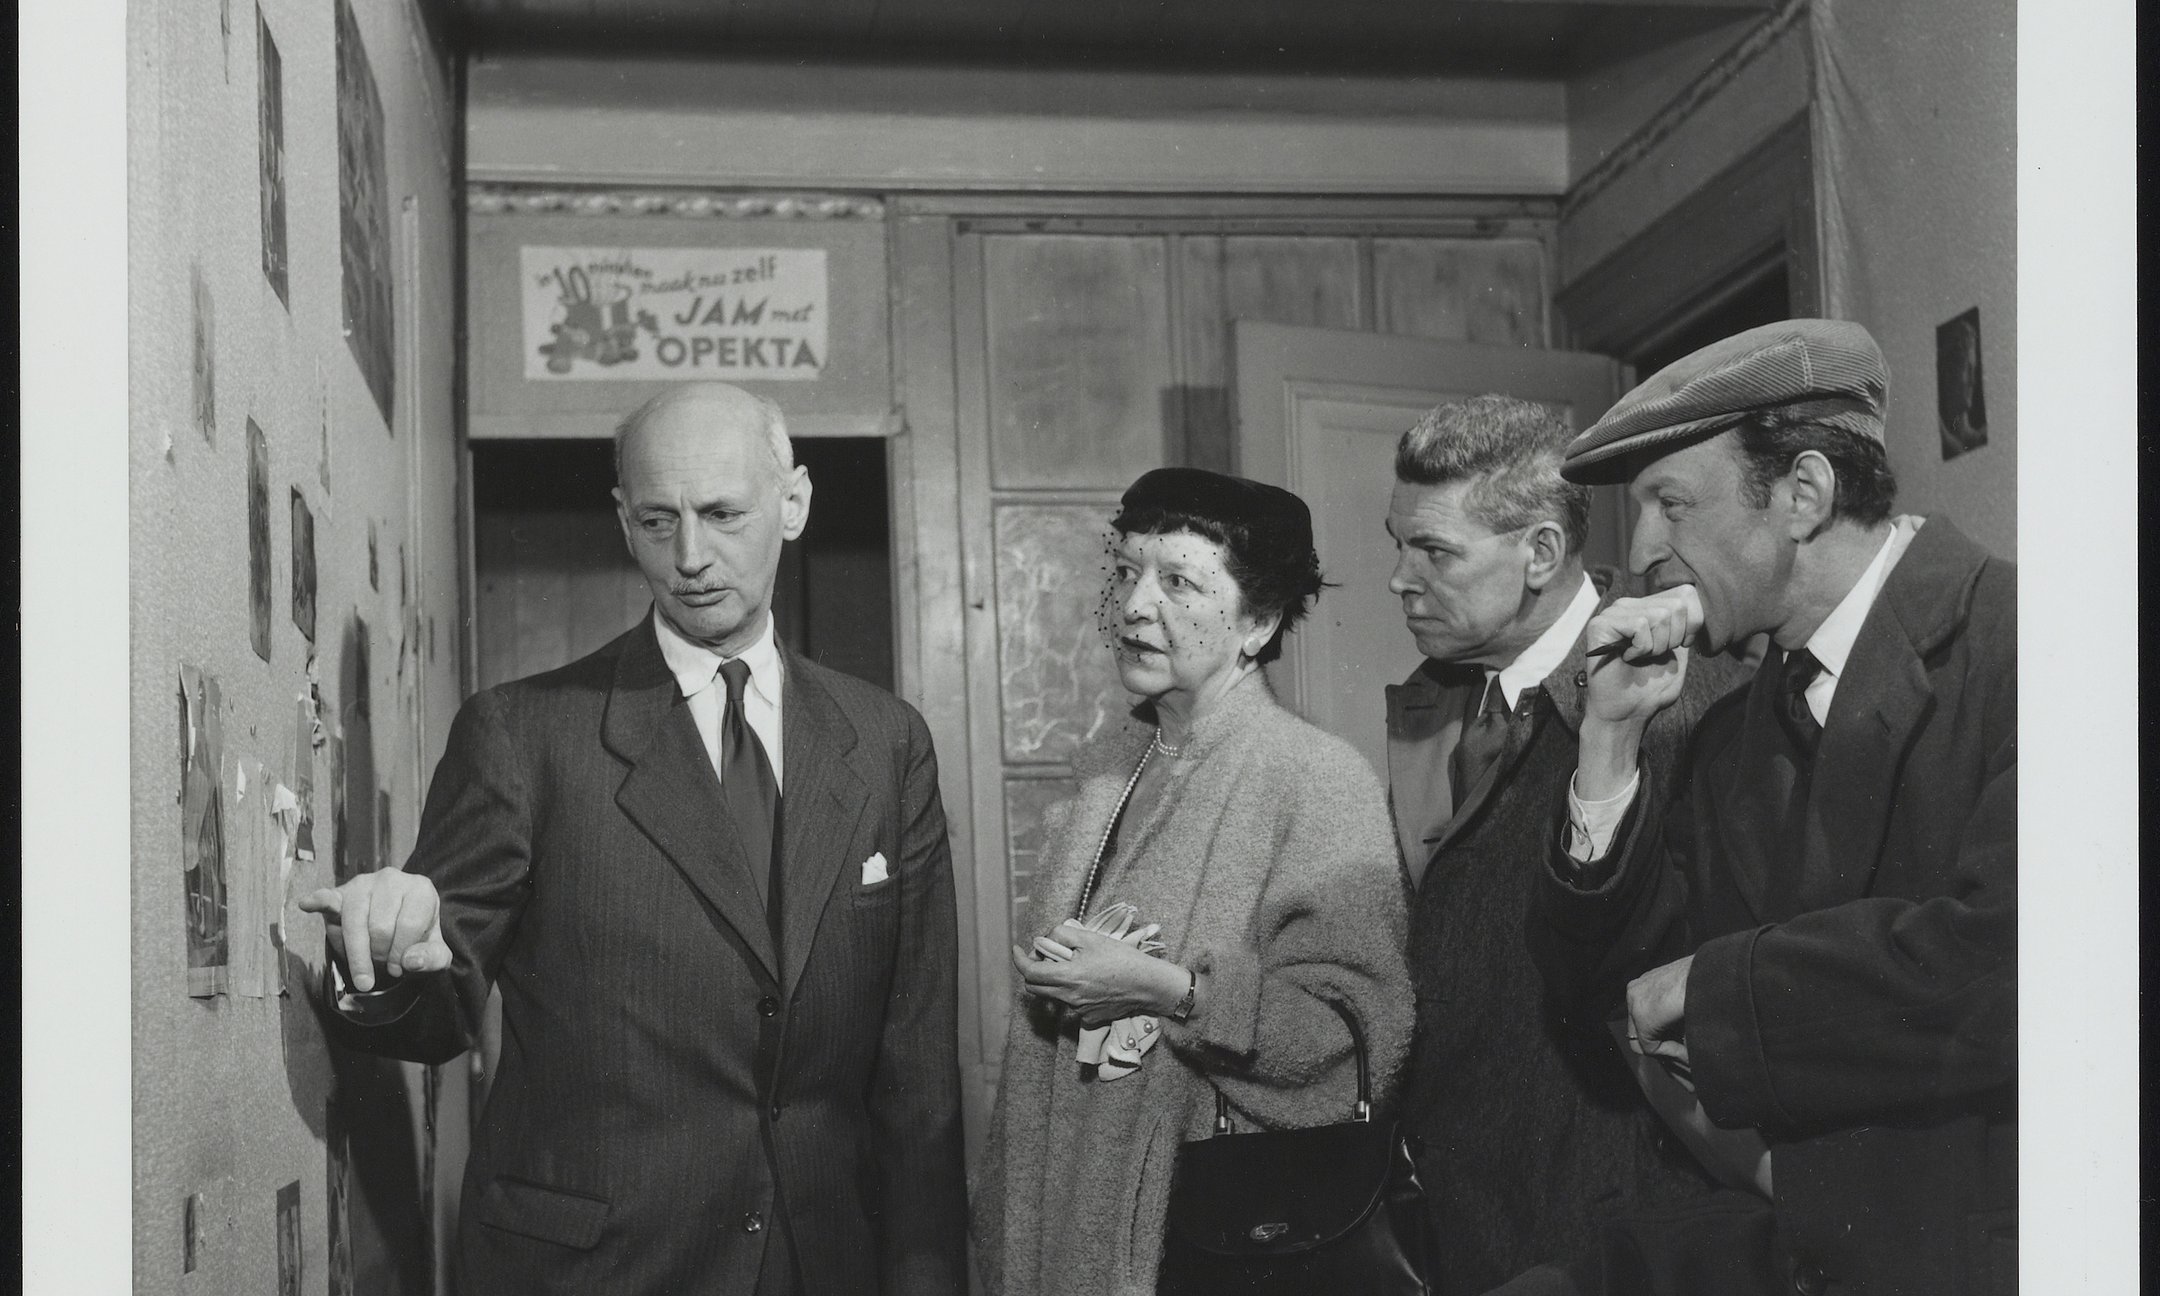 On the left: Otto Frank in 1954 in Anne’s room in the Secret Annex. On the right: the writers and director of the play ‘The Diary of Anne Frank’, which opened on Broadway in 1955.